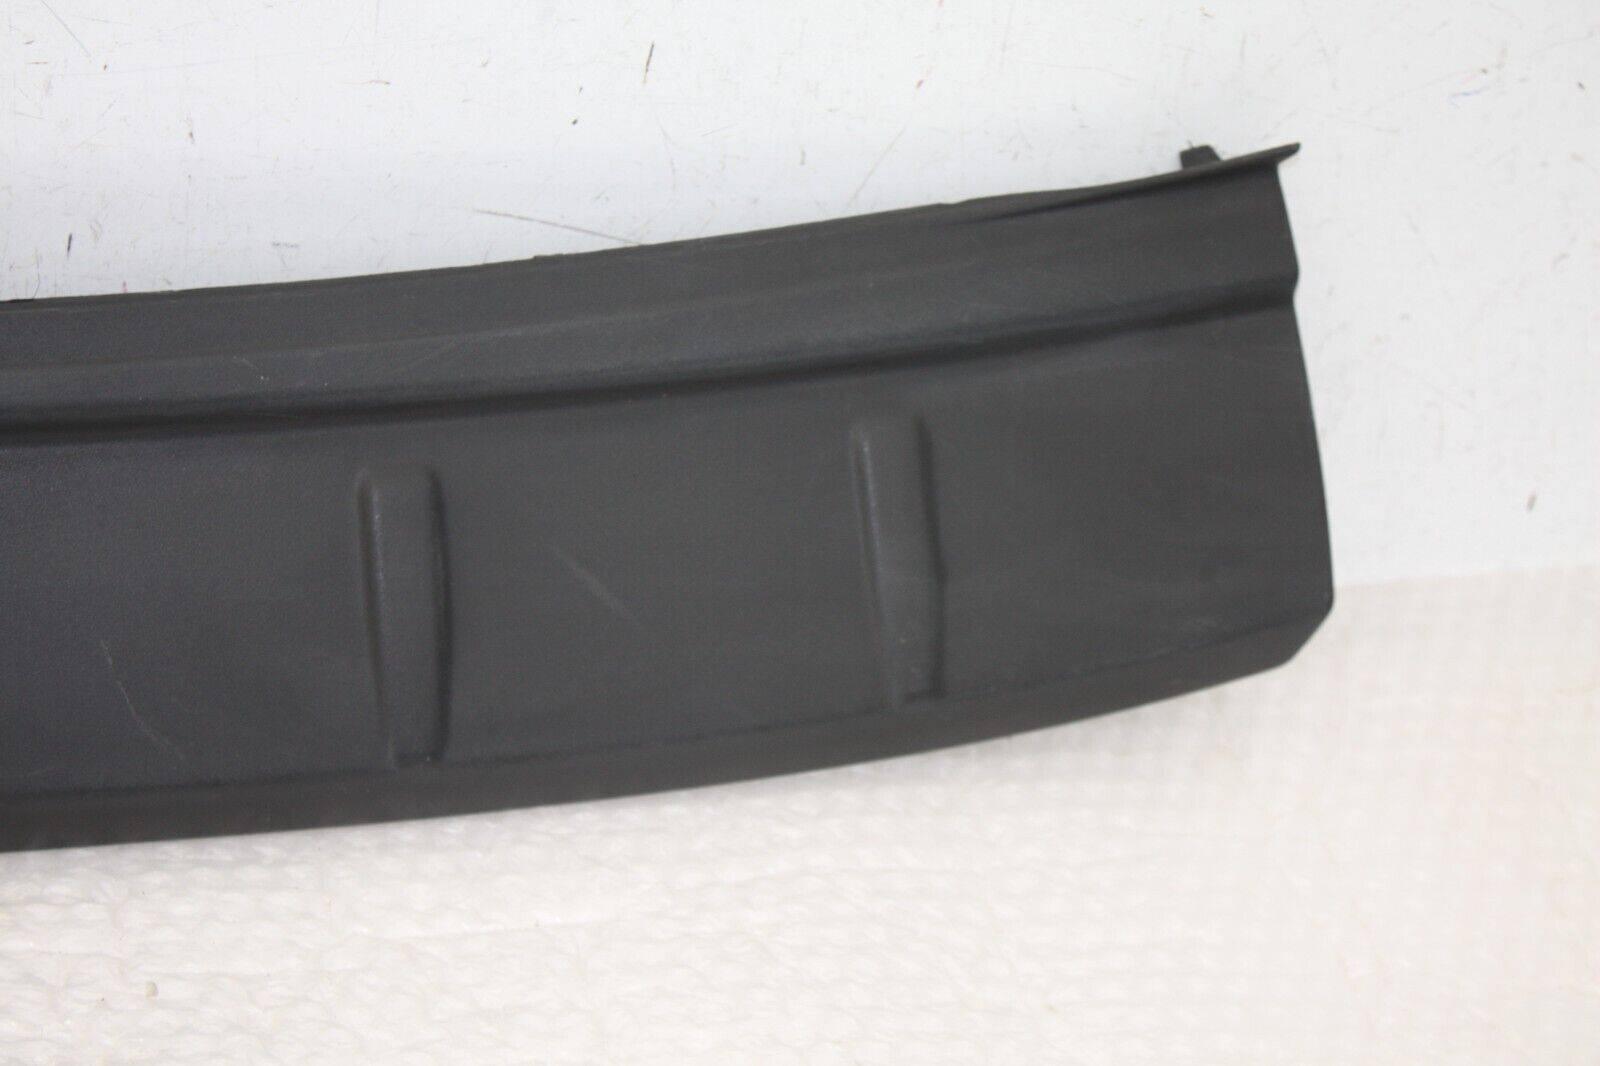 Volvo-XC60-Rear-Bumper-Protection-Cover-30764525-Genuine-FIXING-DAMAGED-176362657810-2